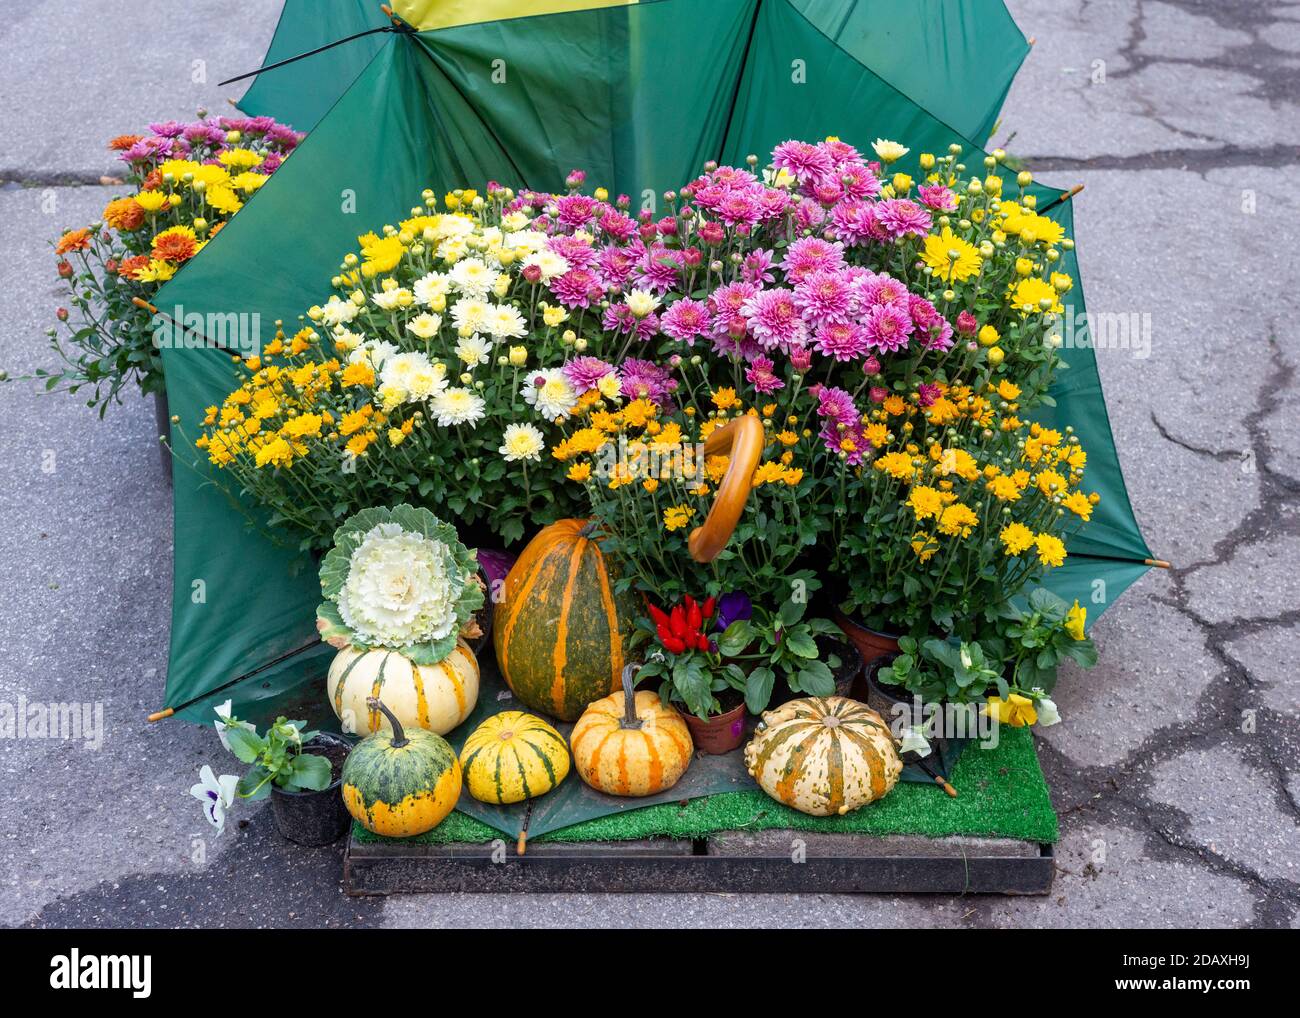 Arranged pumpkins and flowers in umbrella as nature morte street art composition in park in Sofia Bulgaria Stock Photo